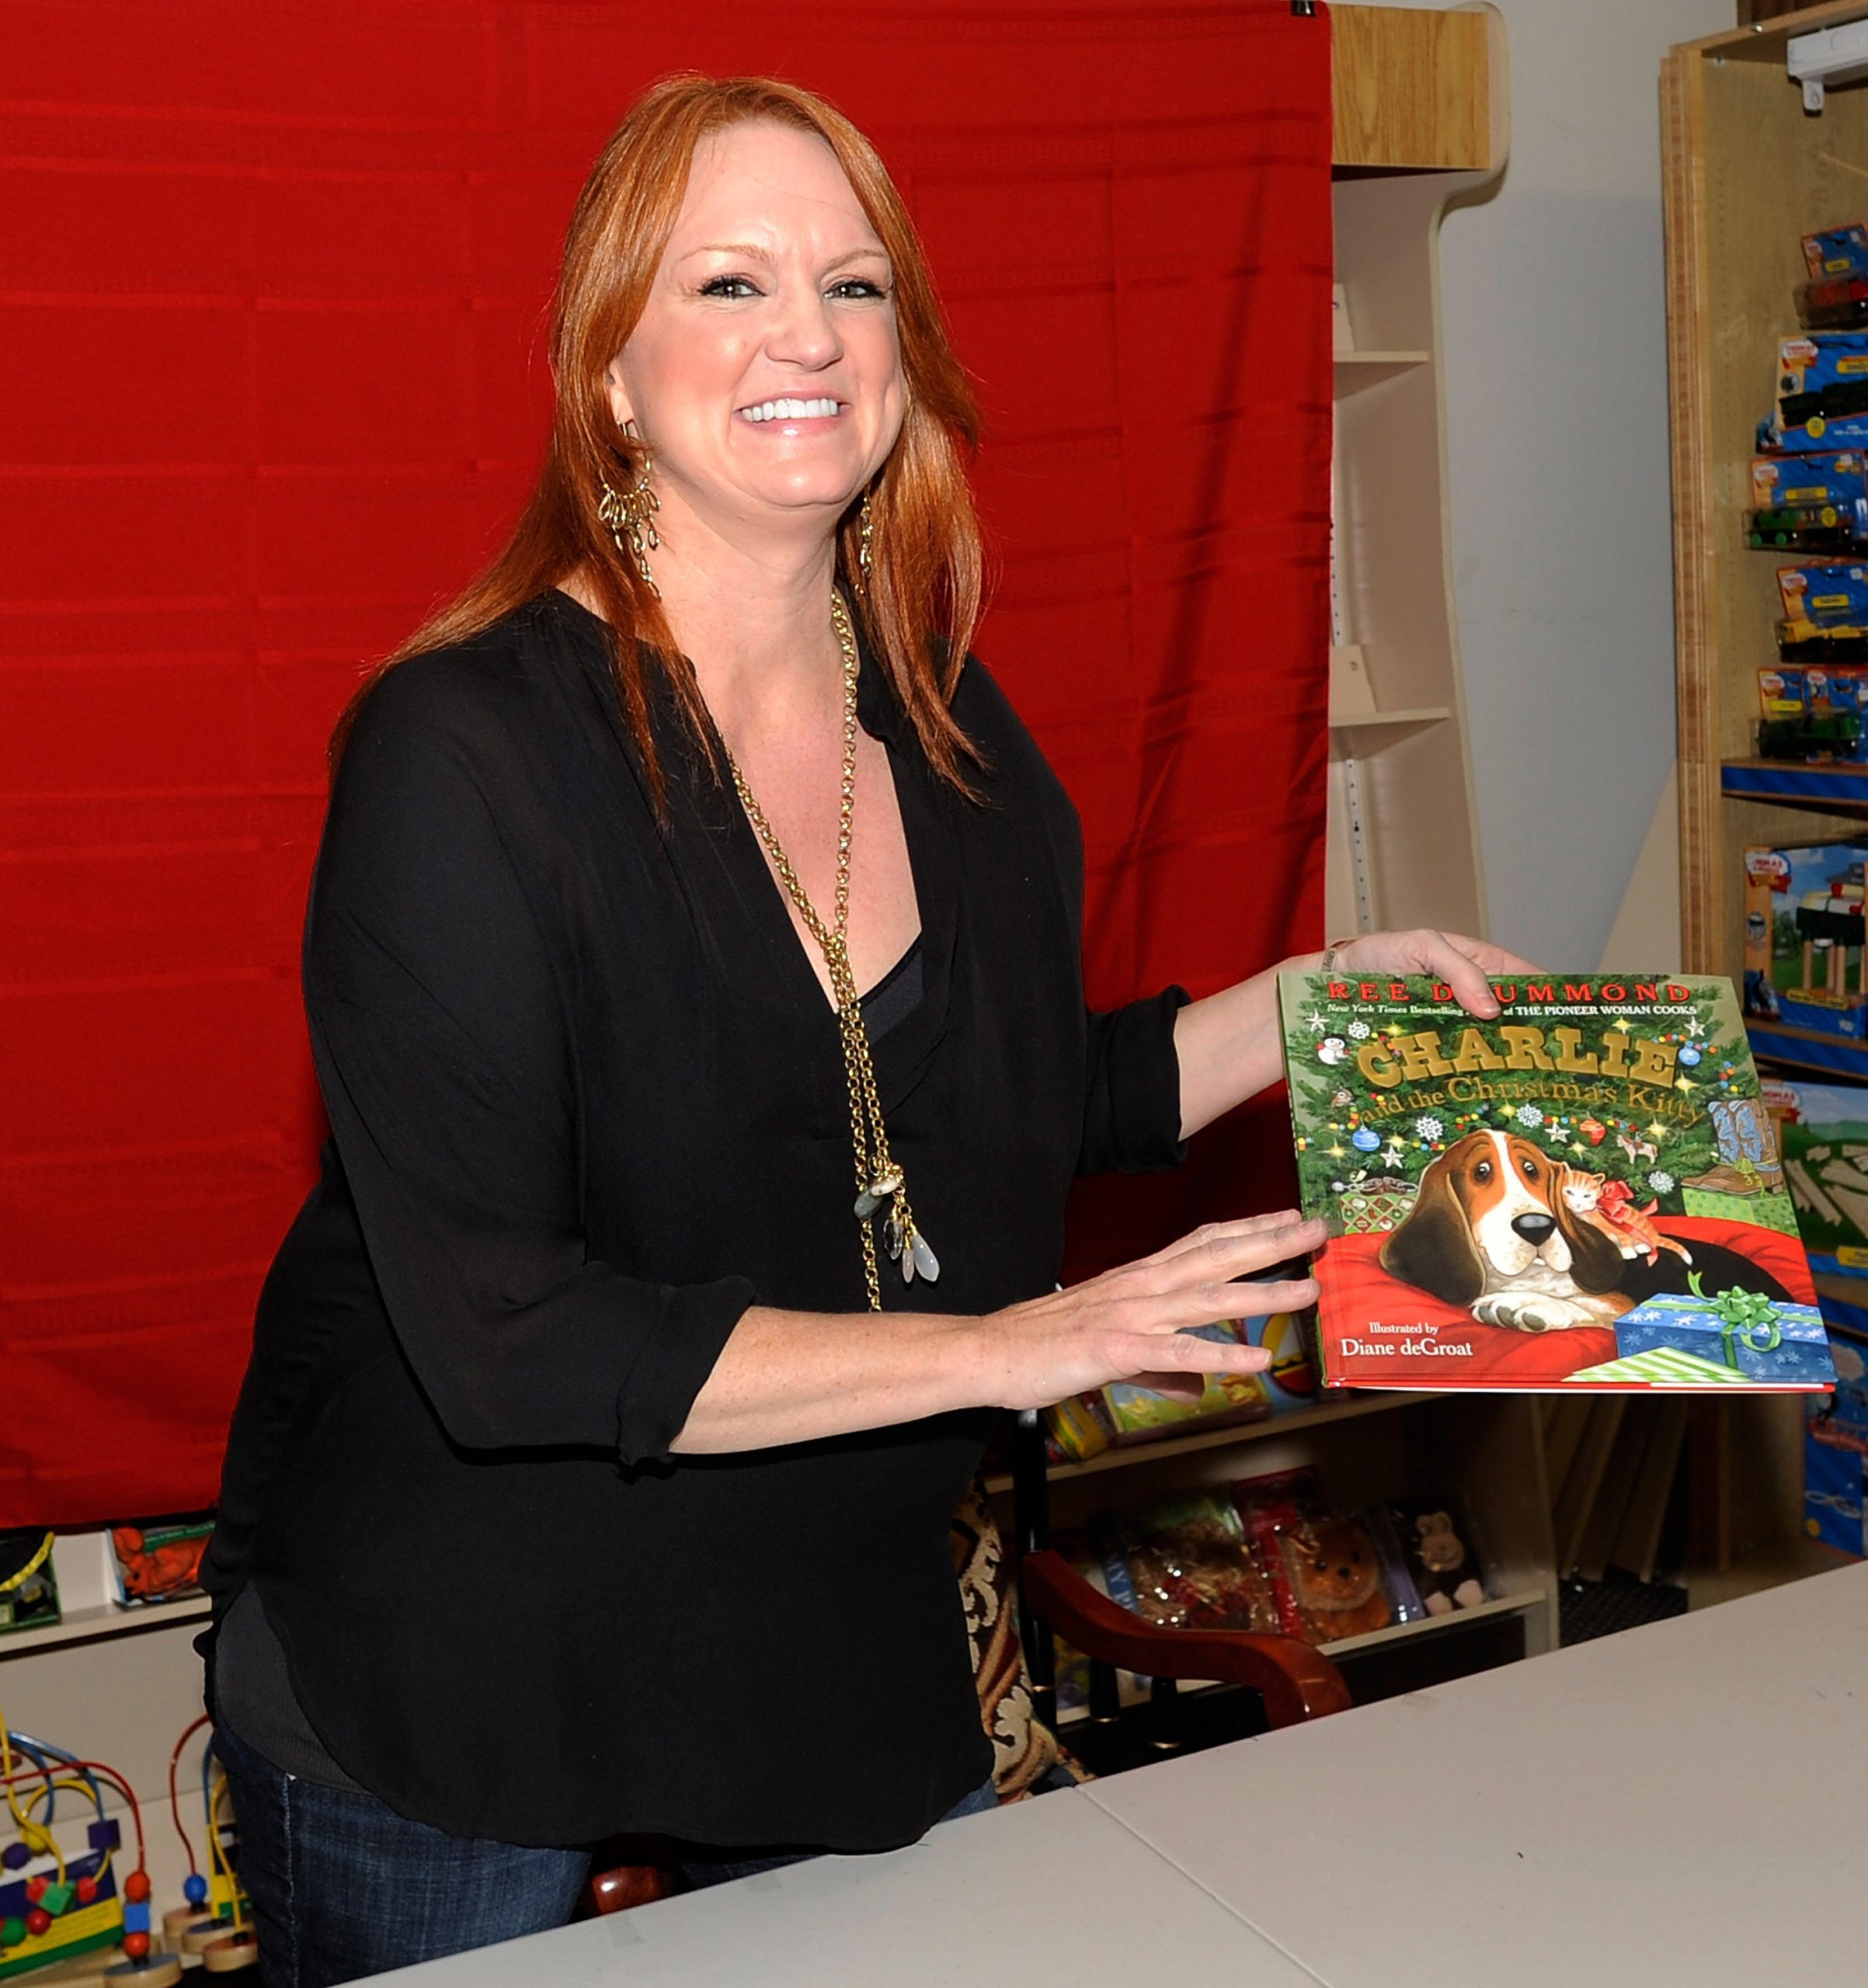 'The Pioneer Woman' star Ree Drummond signs copies of her children's book, 'Charlie and the Christmas Kitty' in 2012.